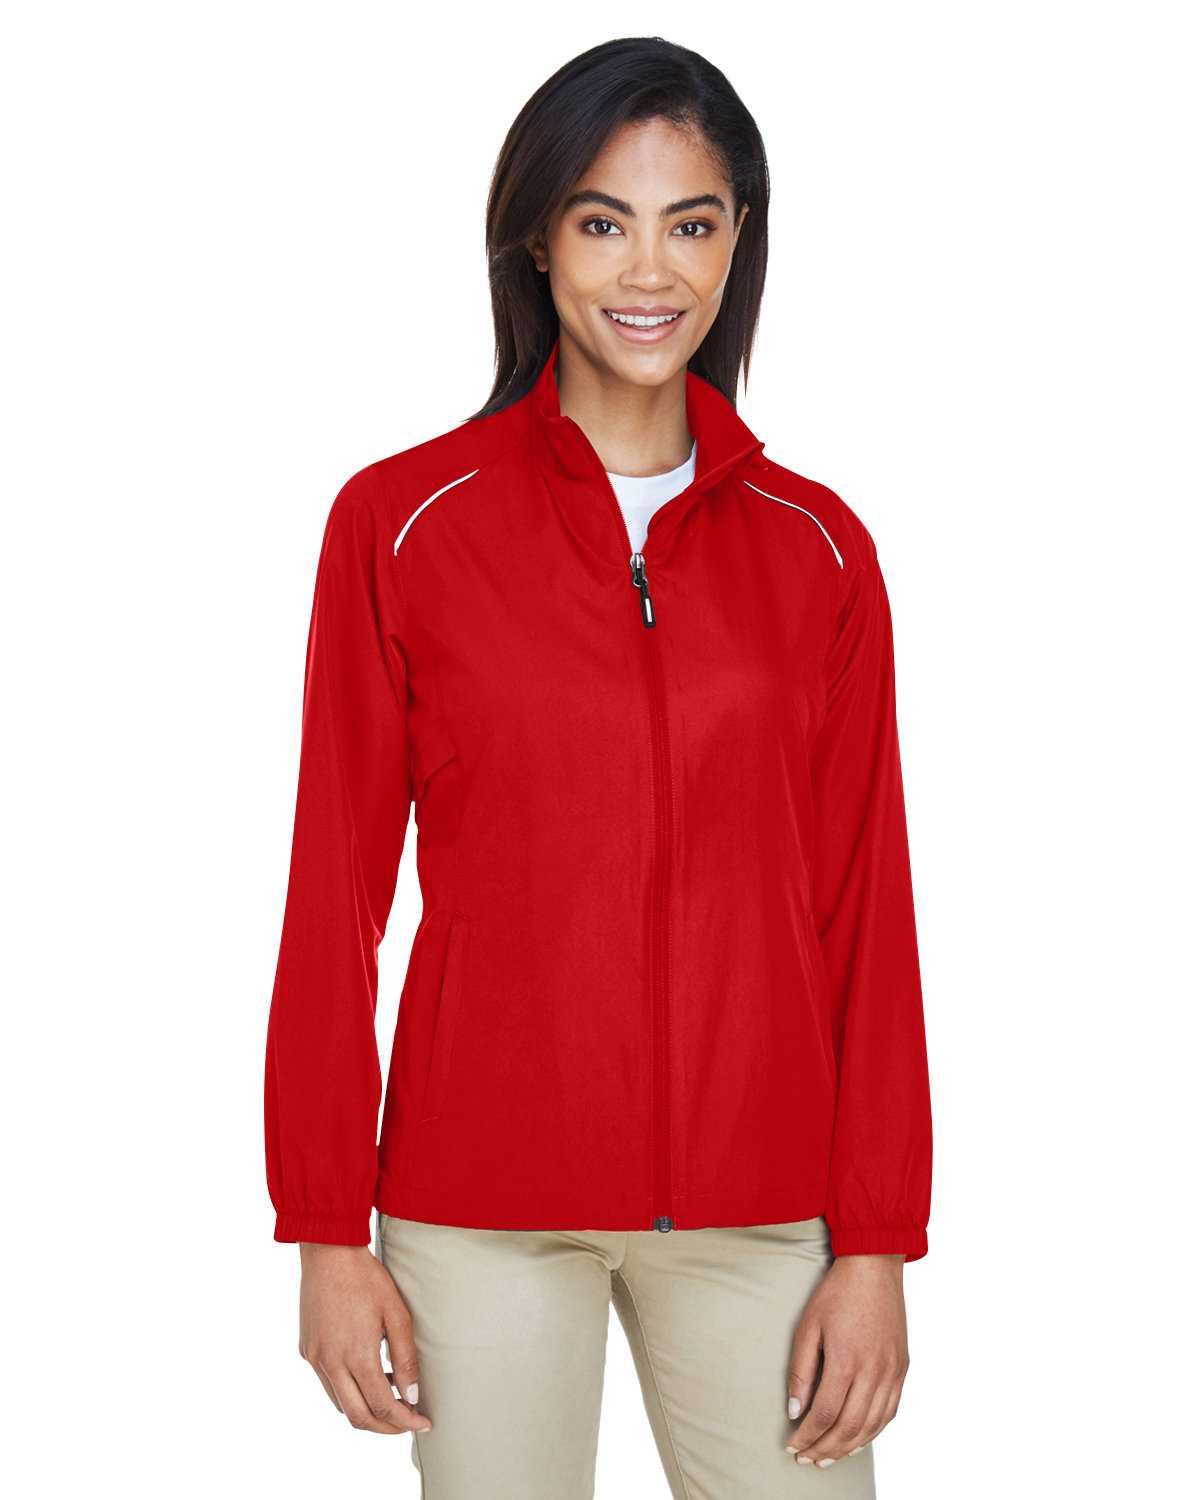 Core365 Ladies' Techno Lite Motivate Unlined Lightweight Jacket CLASSIC RED 